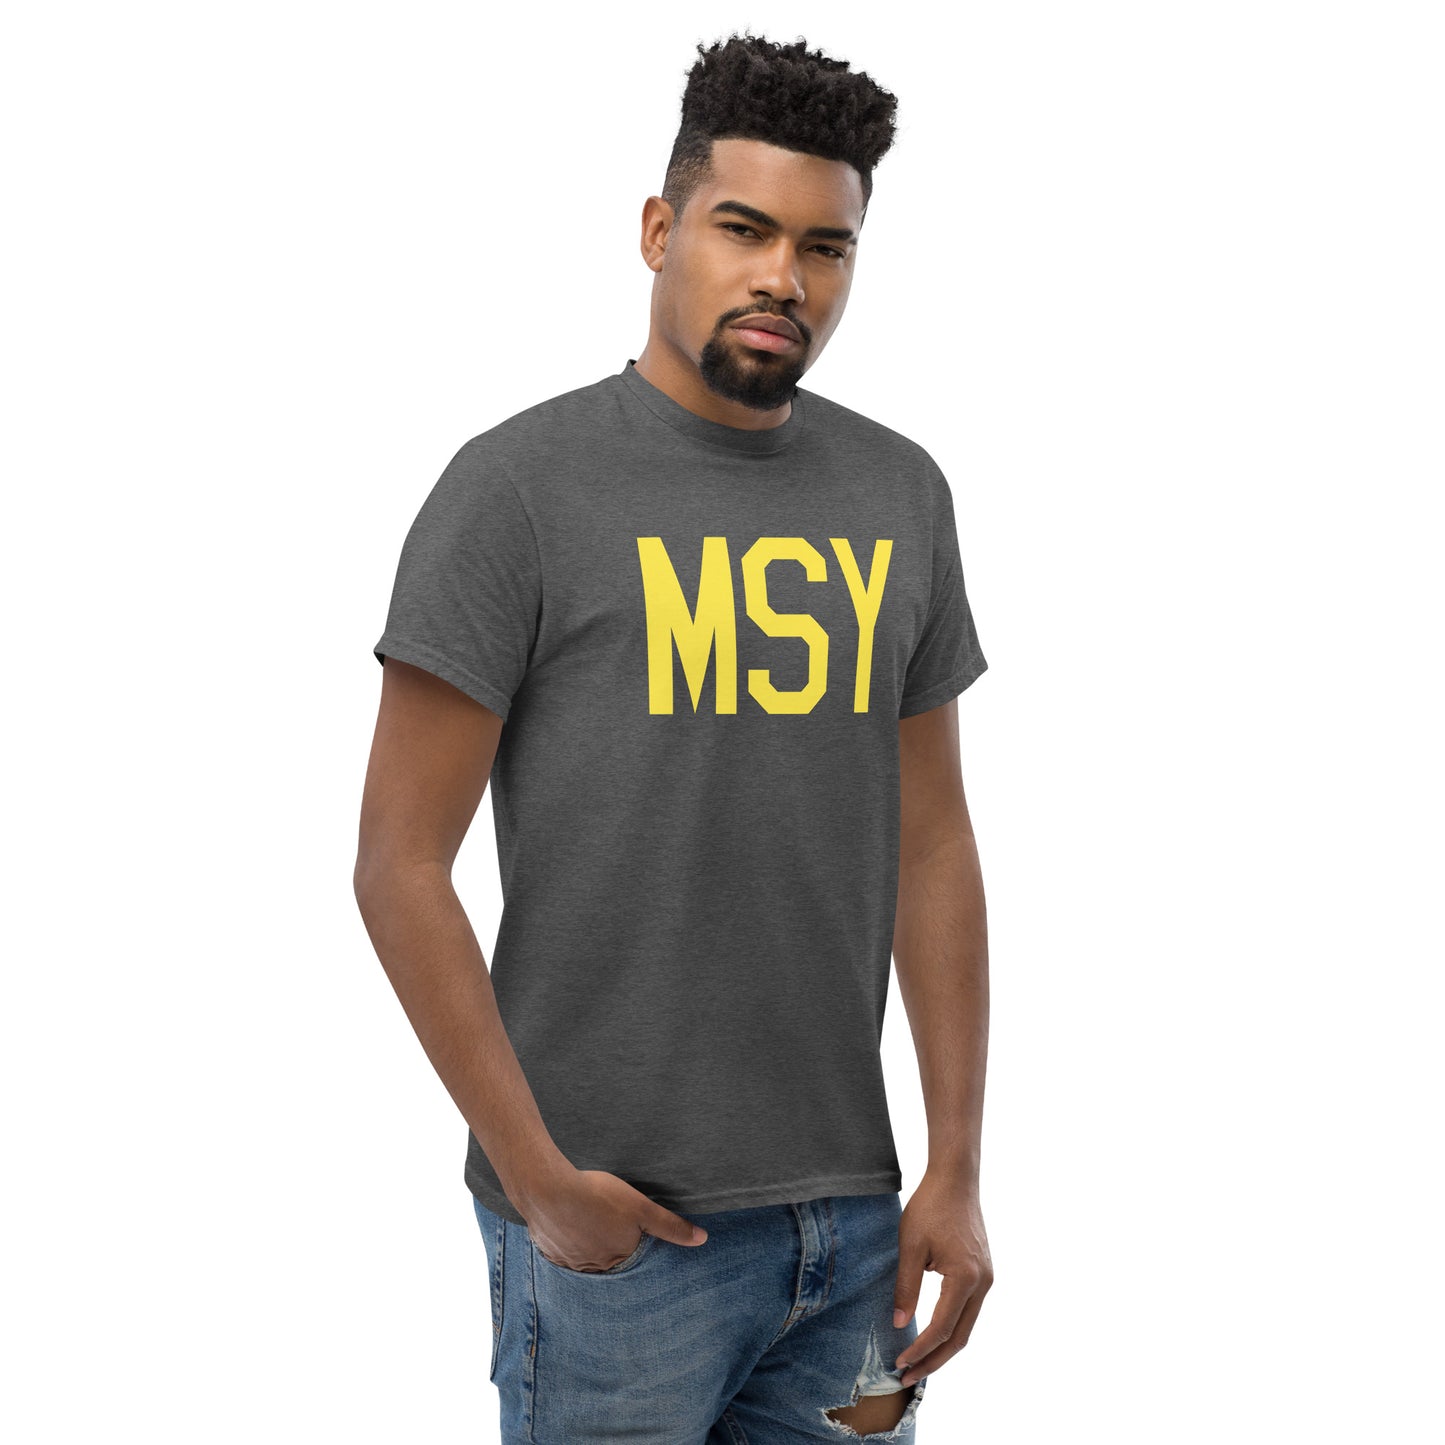 Aviation-Theme Men's T-Shirt - Yellow Graphic • MSY New Orleans • YHM Designs - Image 08